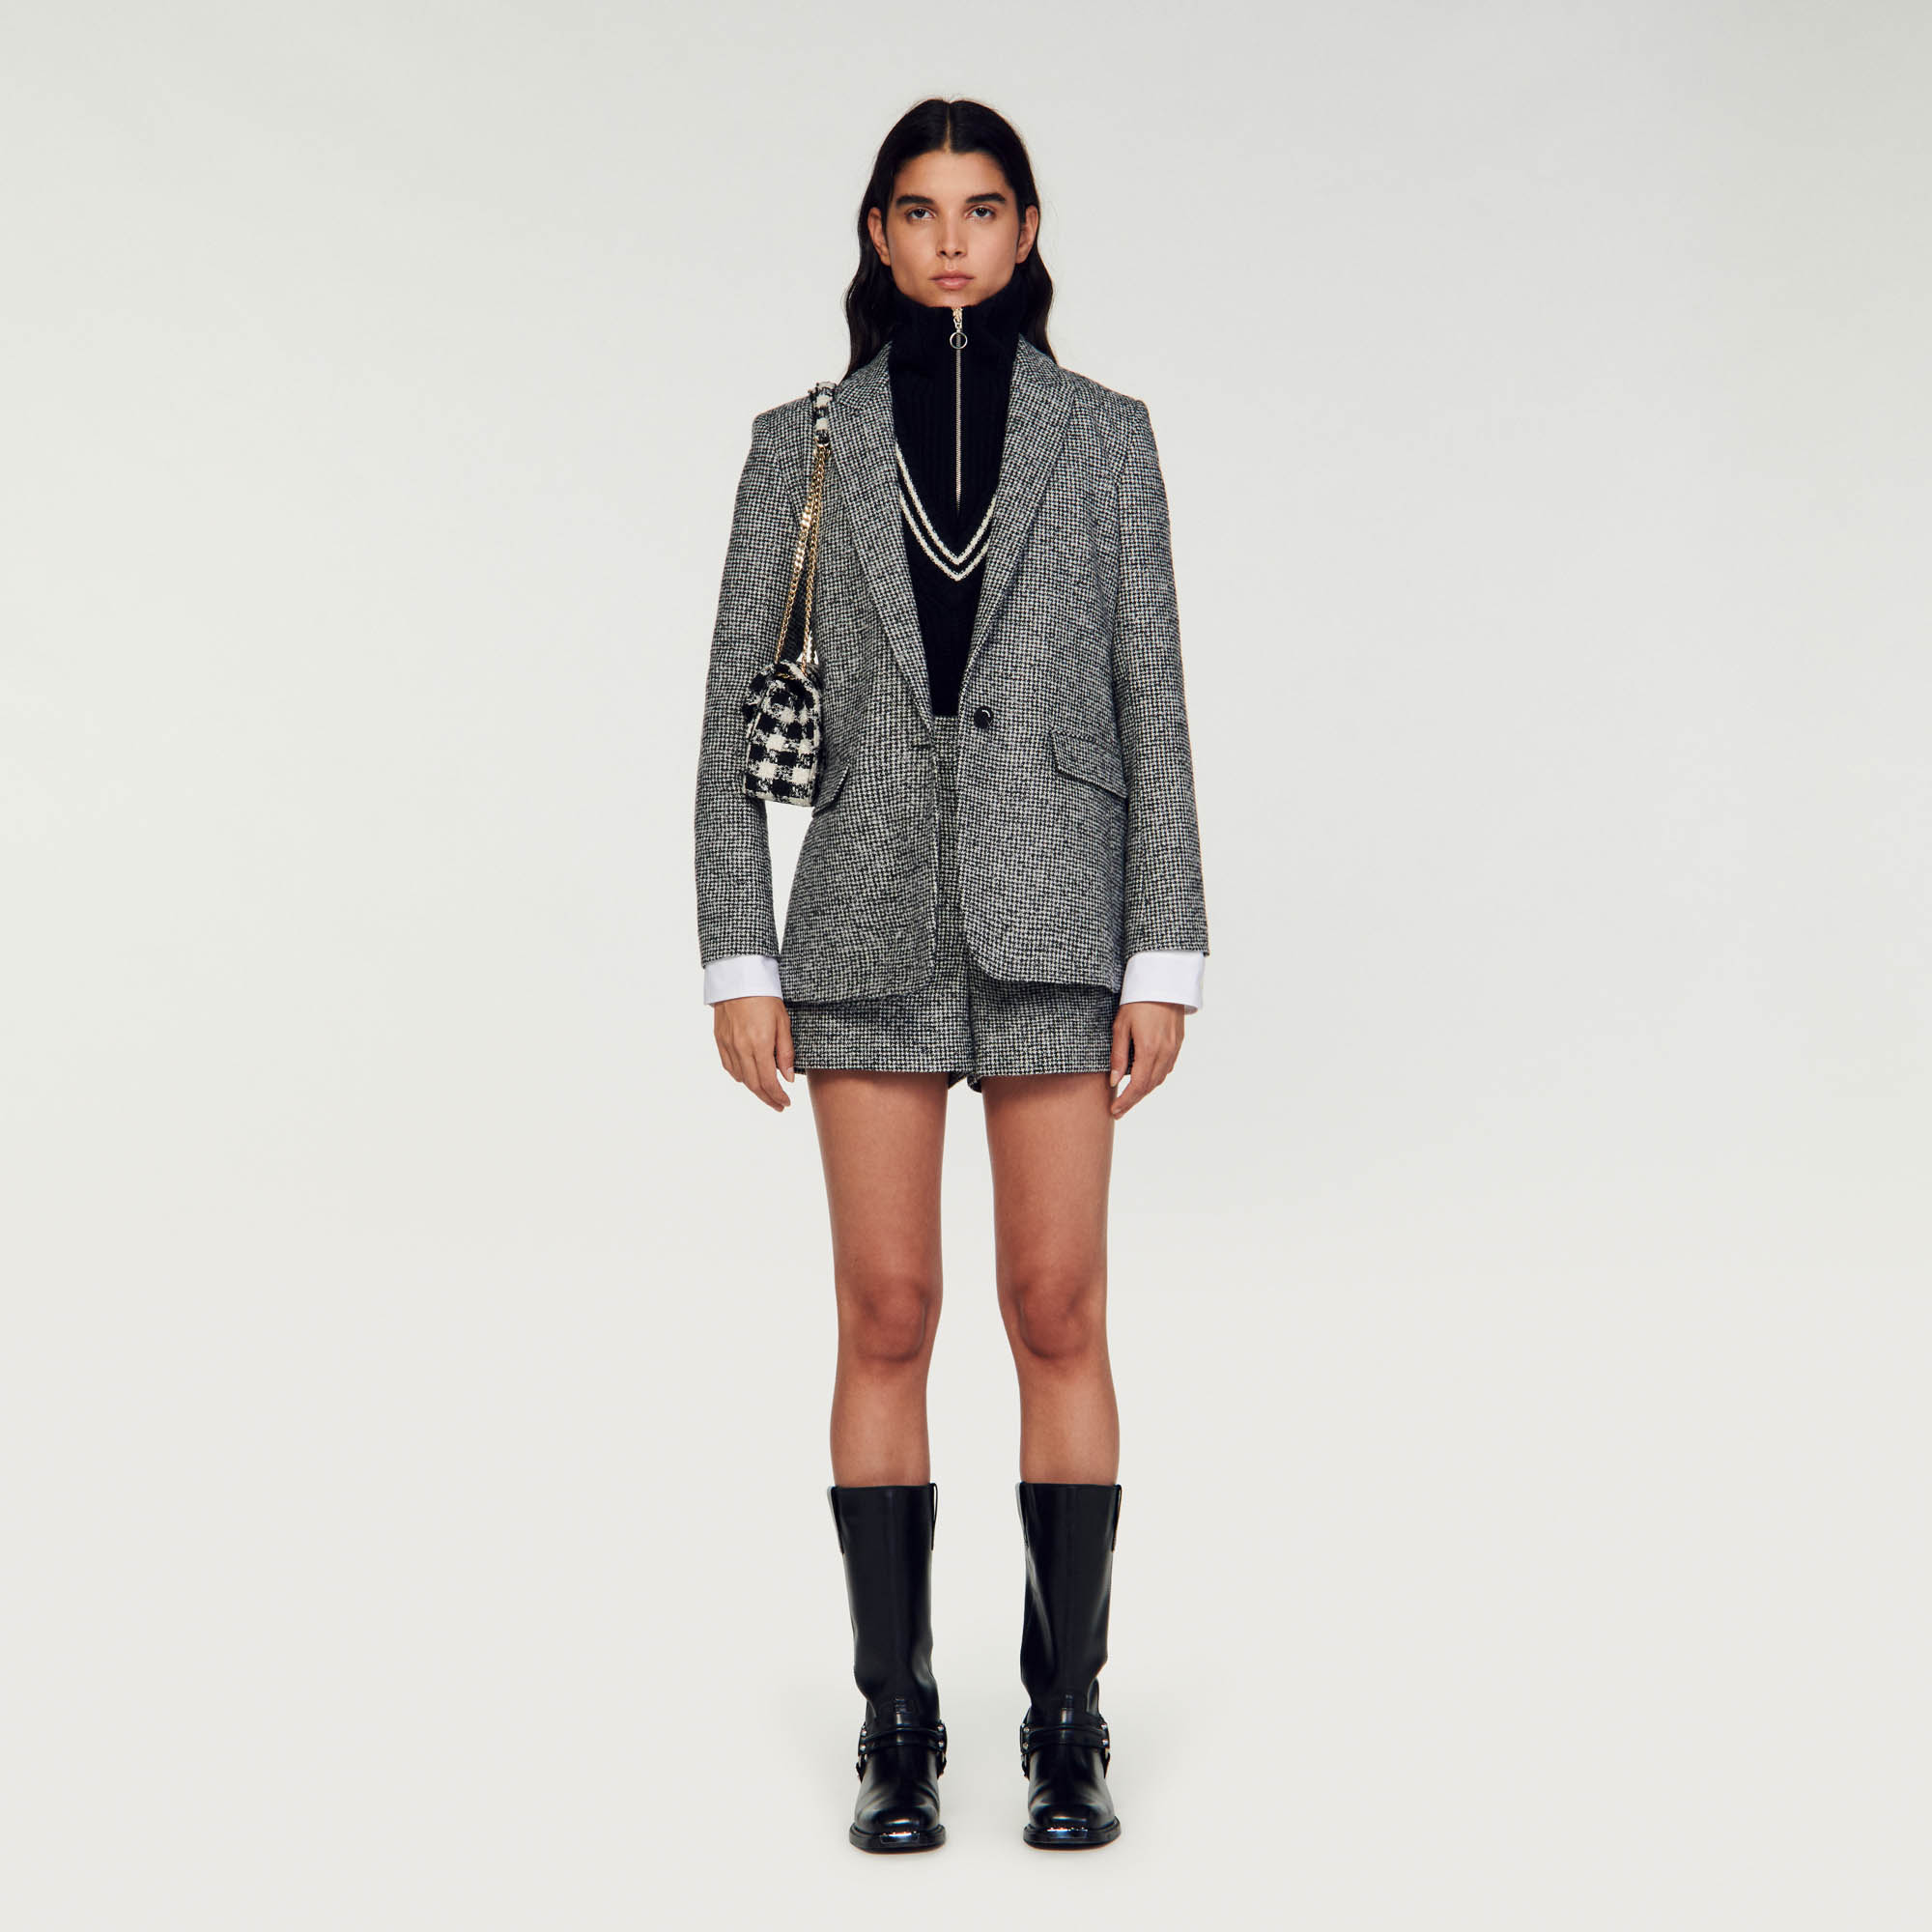 Sandro wool Houndstooth wool-blend blazer with stand-up turn-up collar, long sleeves and welt pockets at the waist